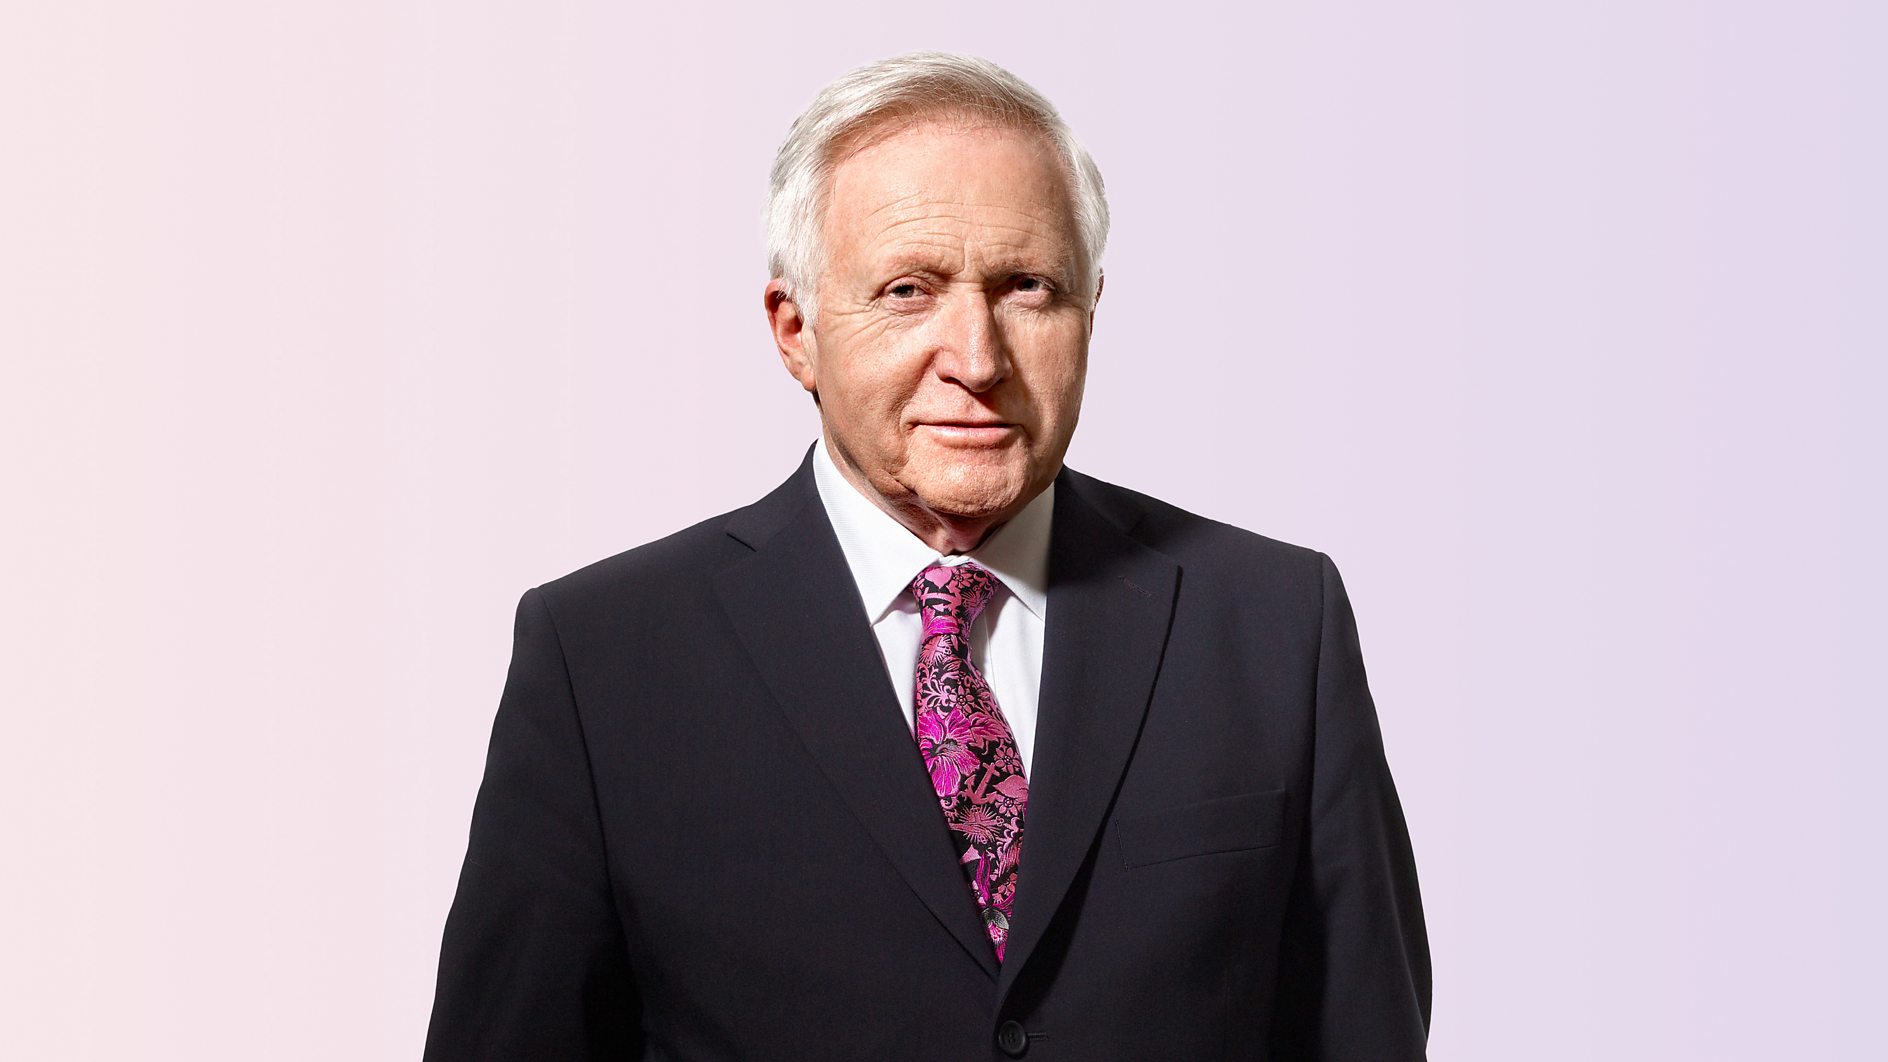 David Dimbleby to present Dimbleby on the Monarchy (w/t), a new series for BBC One and iPlayer